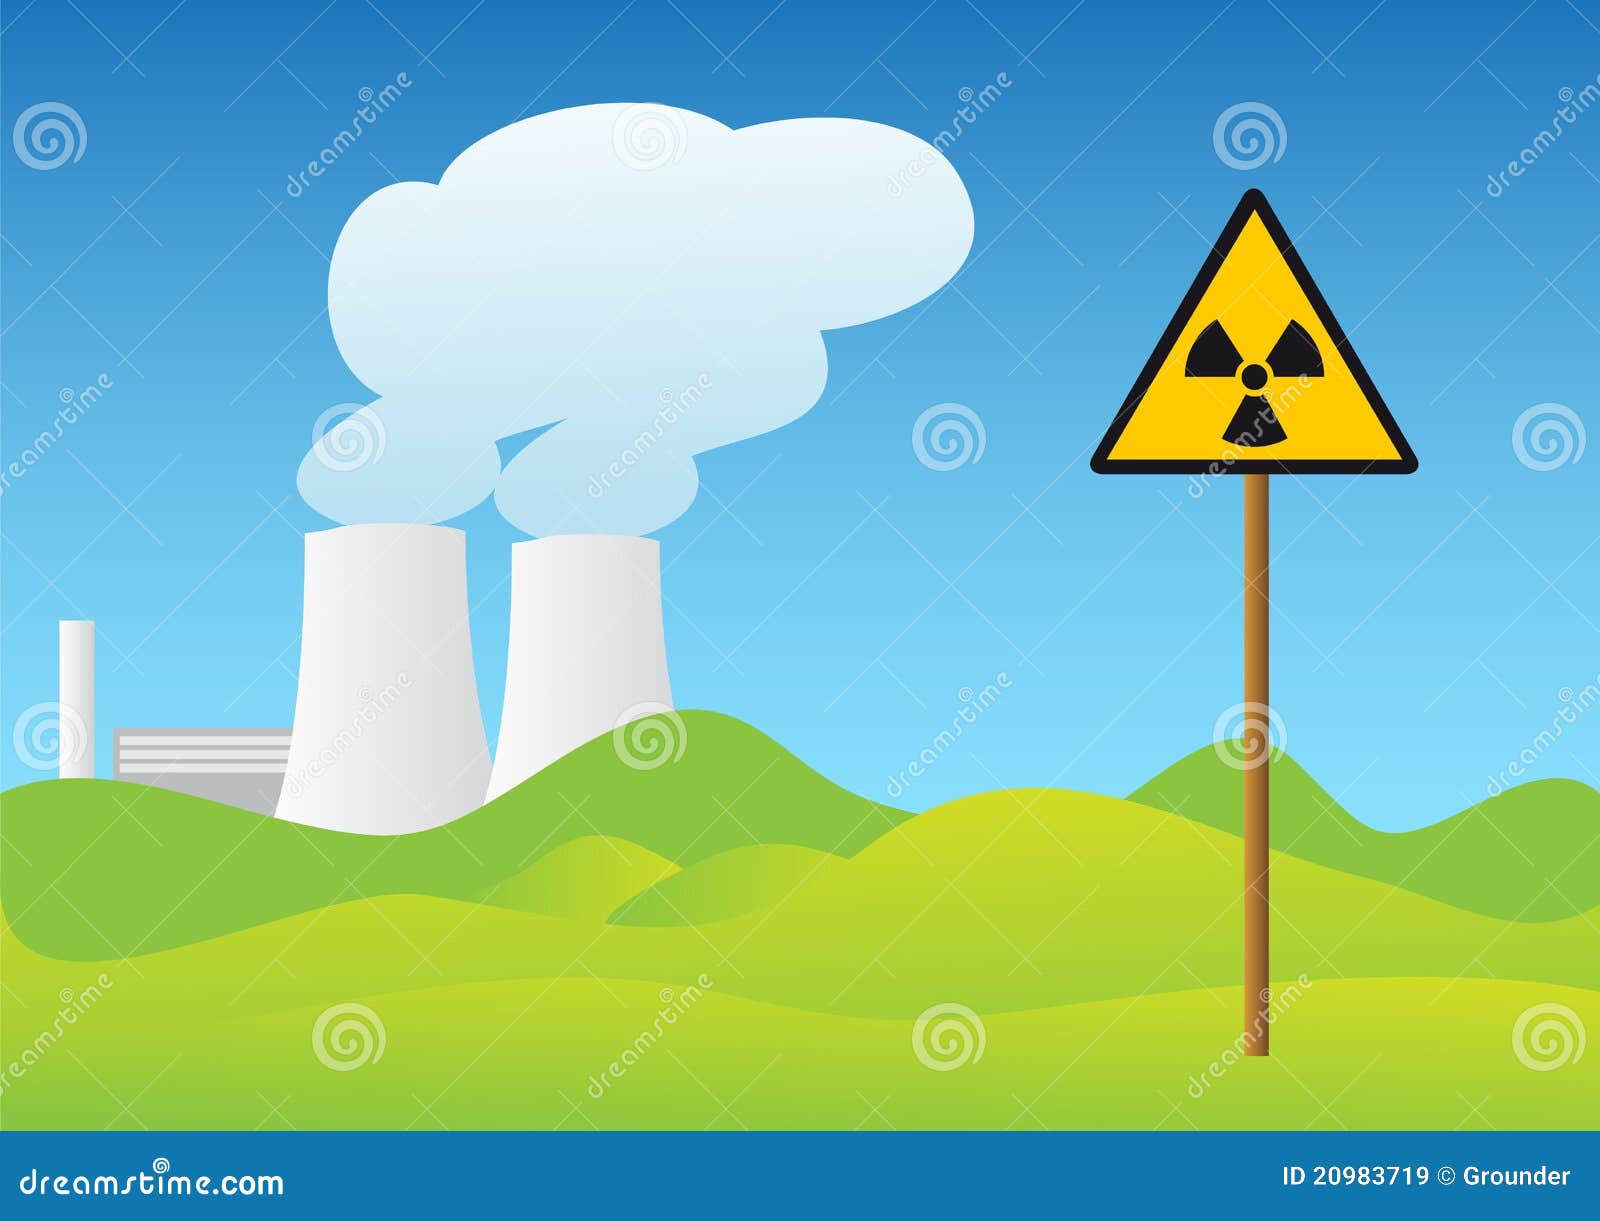 clipart of nuclear power plant - photo #36